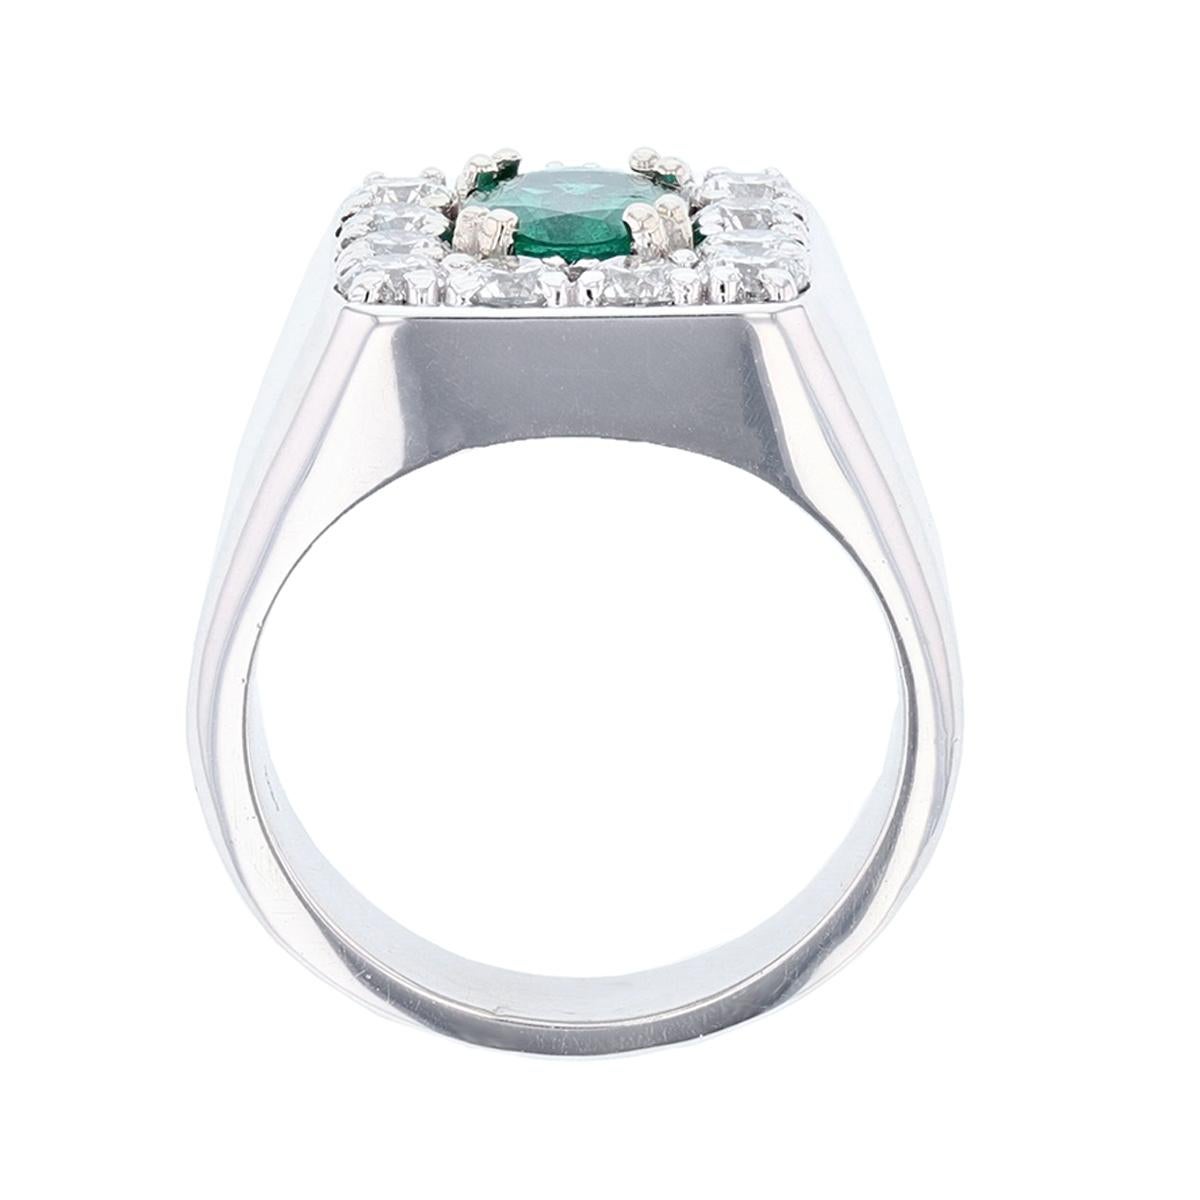 1.44 ct. natural emerald and diamond ring